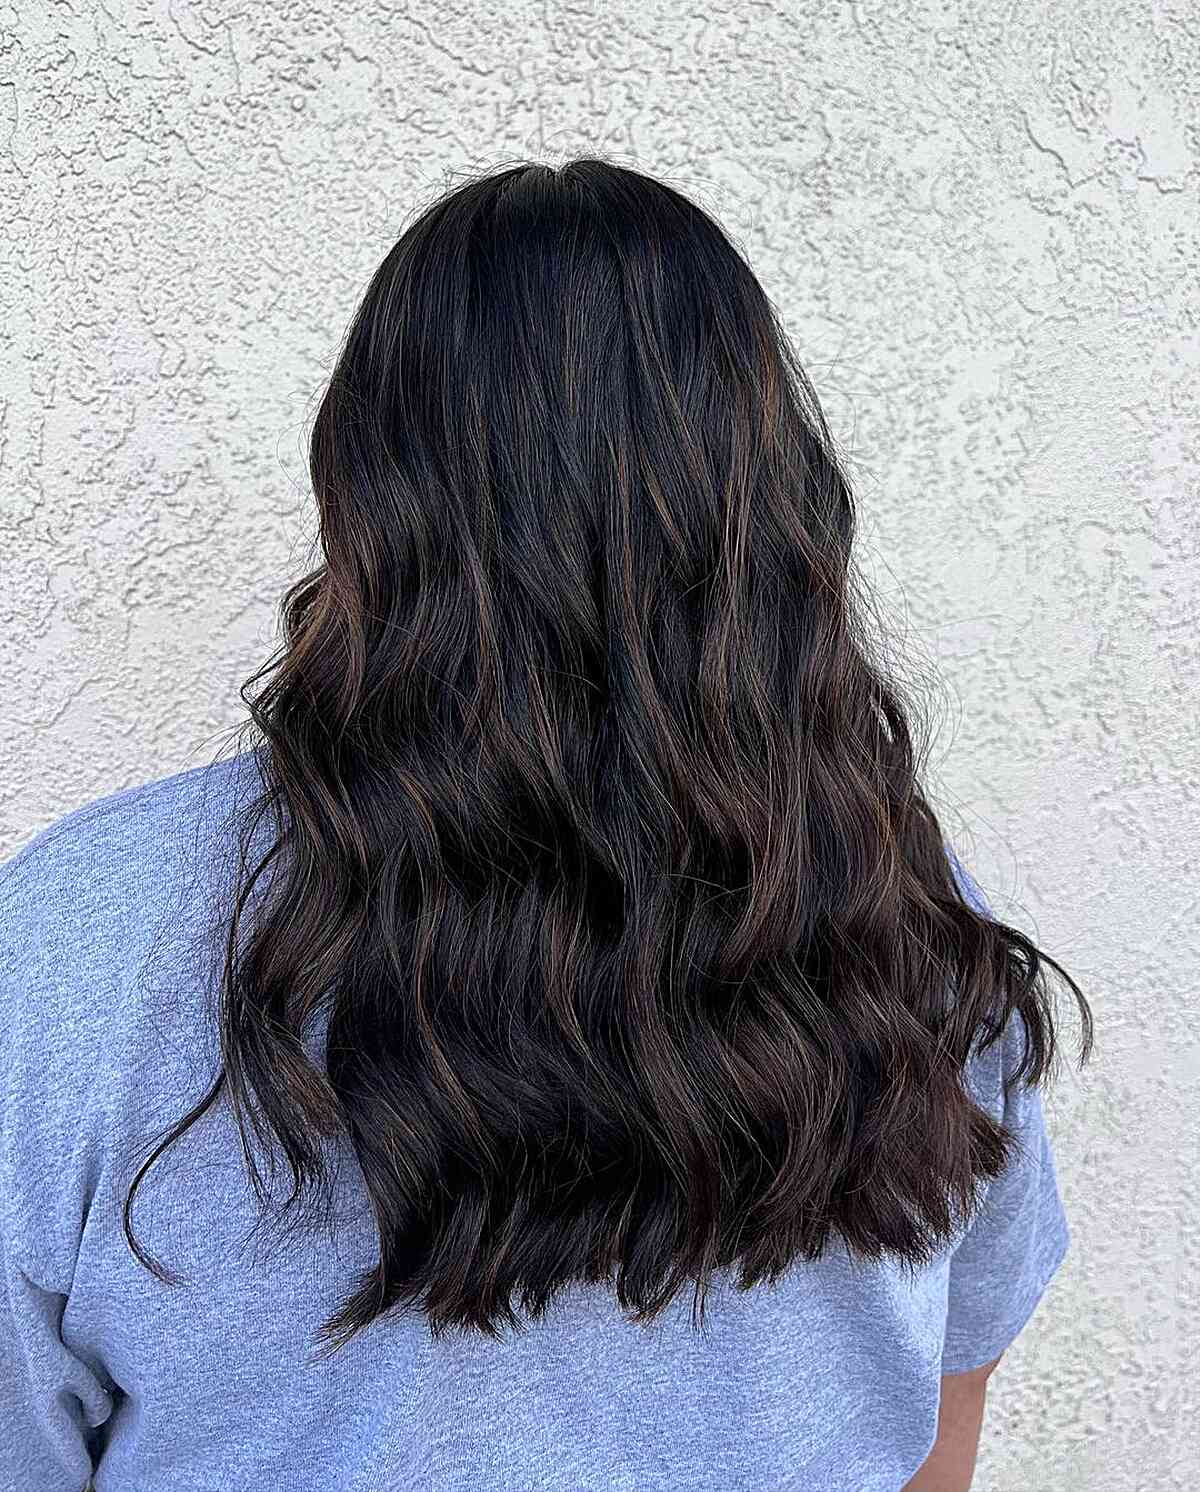 Long Wavy Dark Hair with Subtle Chocolate Partial Highlights